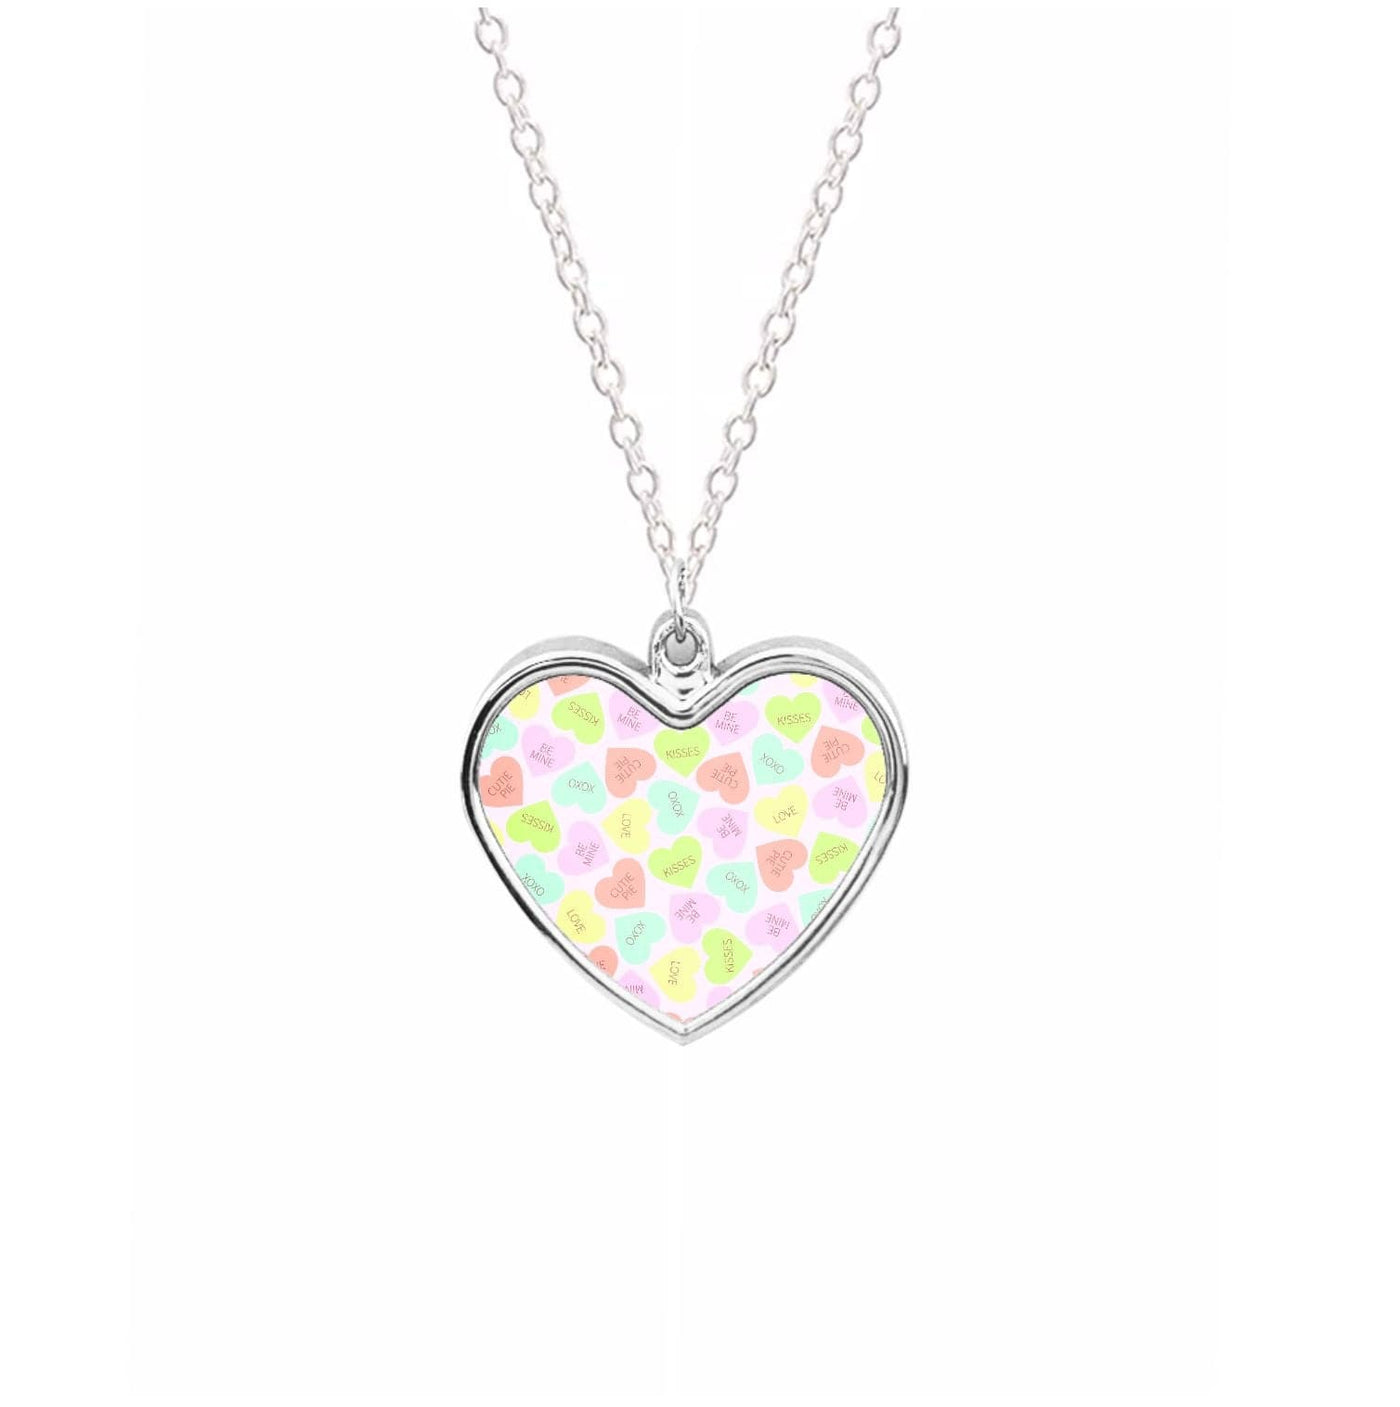 Love Hearts- Valentine's Day Necklace